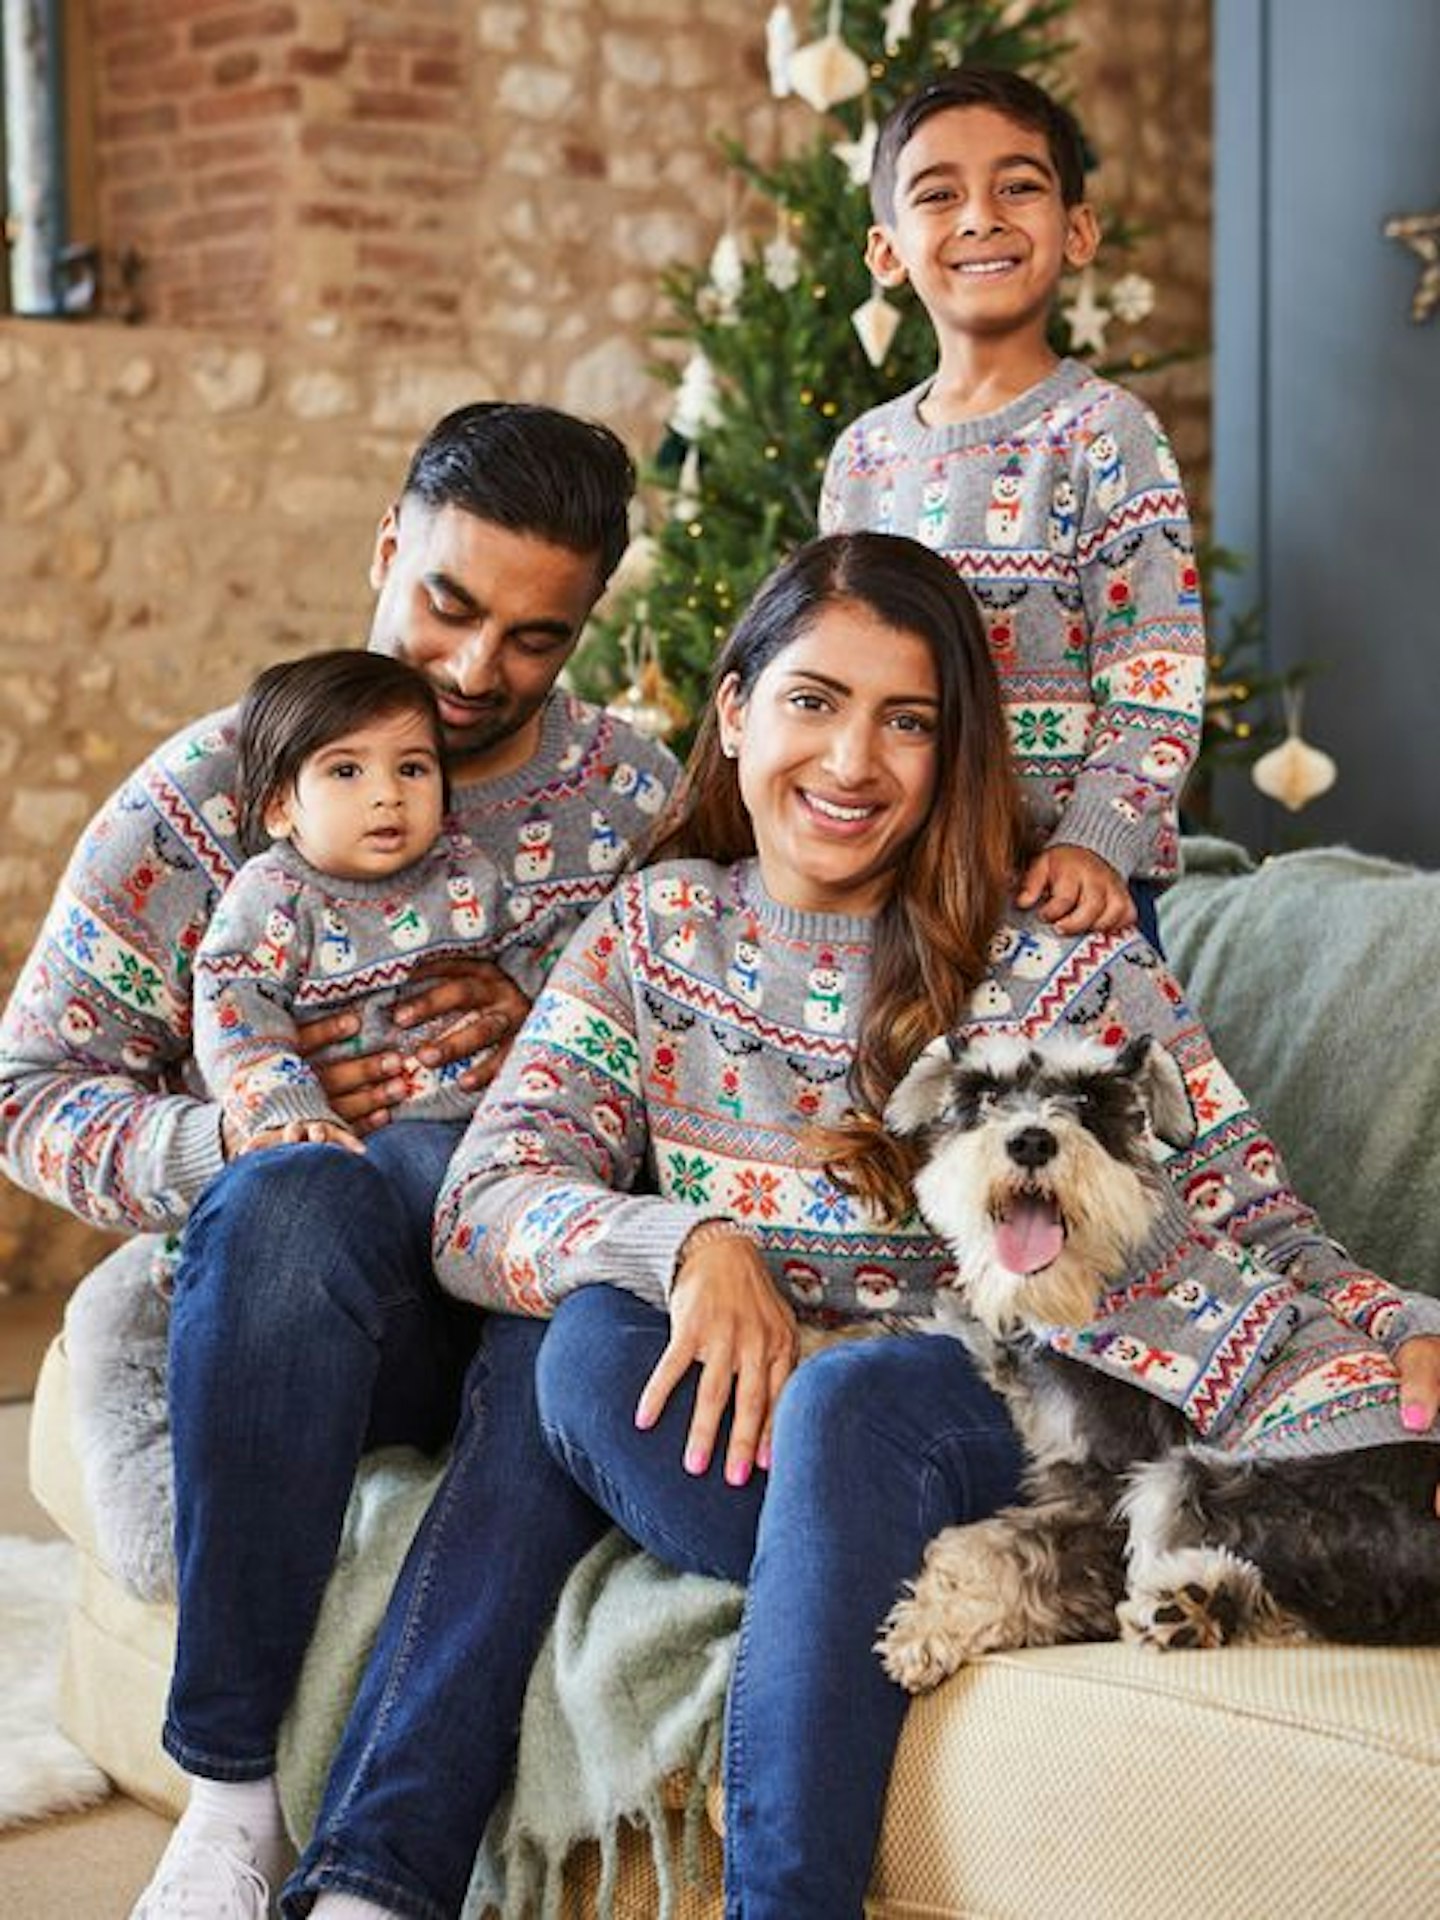 Christmas jumpers for the family fair isle